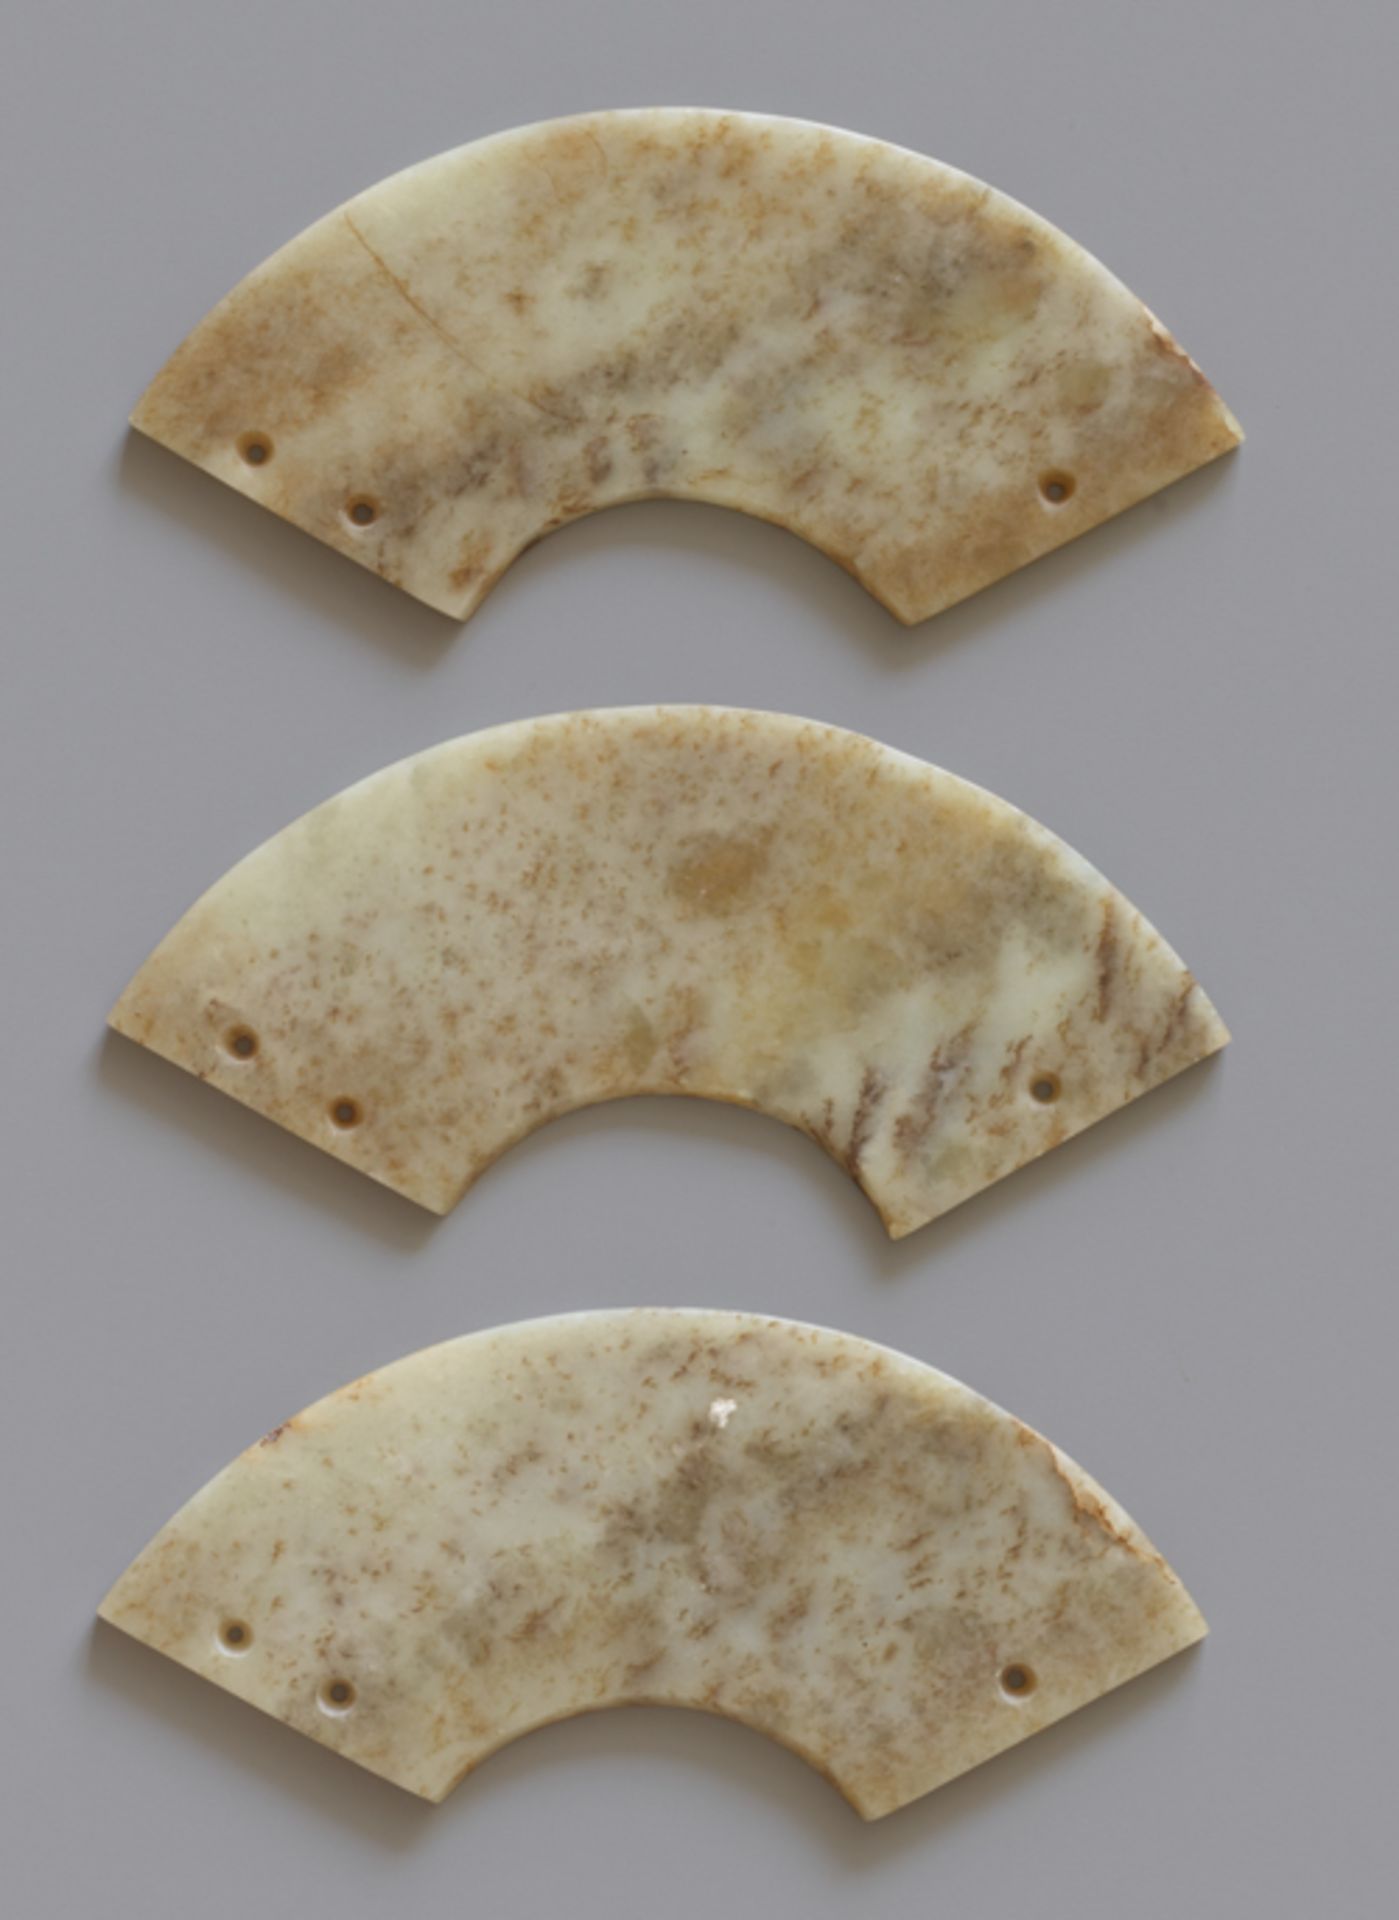 THREE-SECTION DISCJade. China, Late Neolithic period, Qijia culture, c.2200-1900 BCInstead of - Image 4 of 6